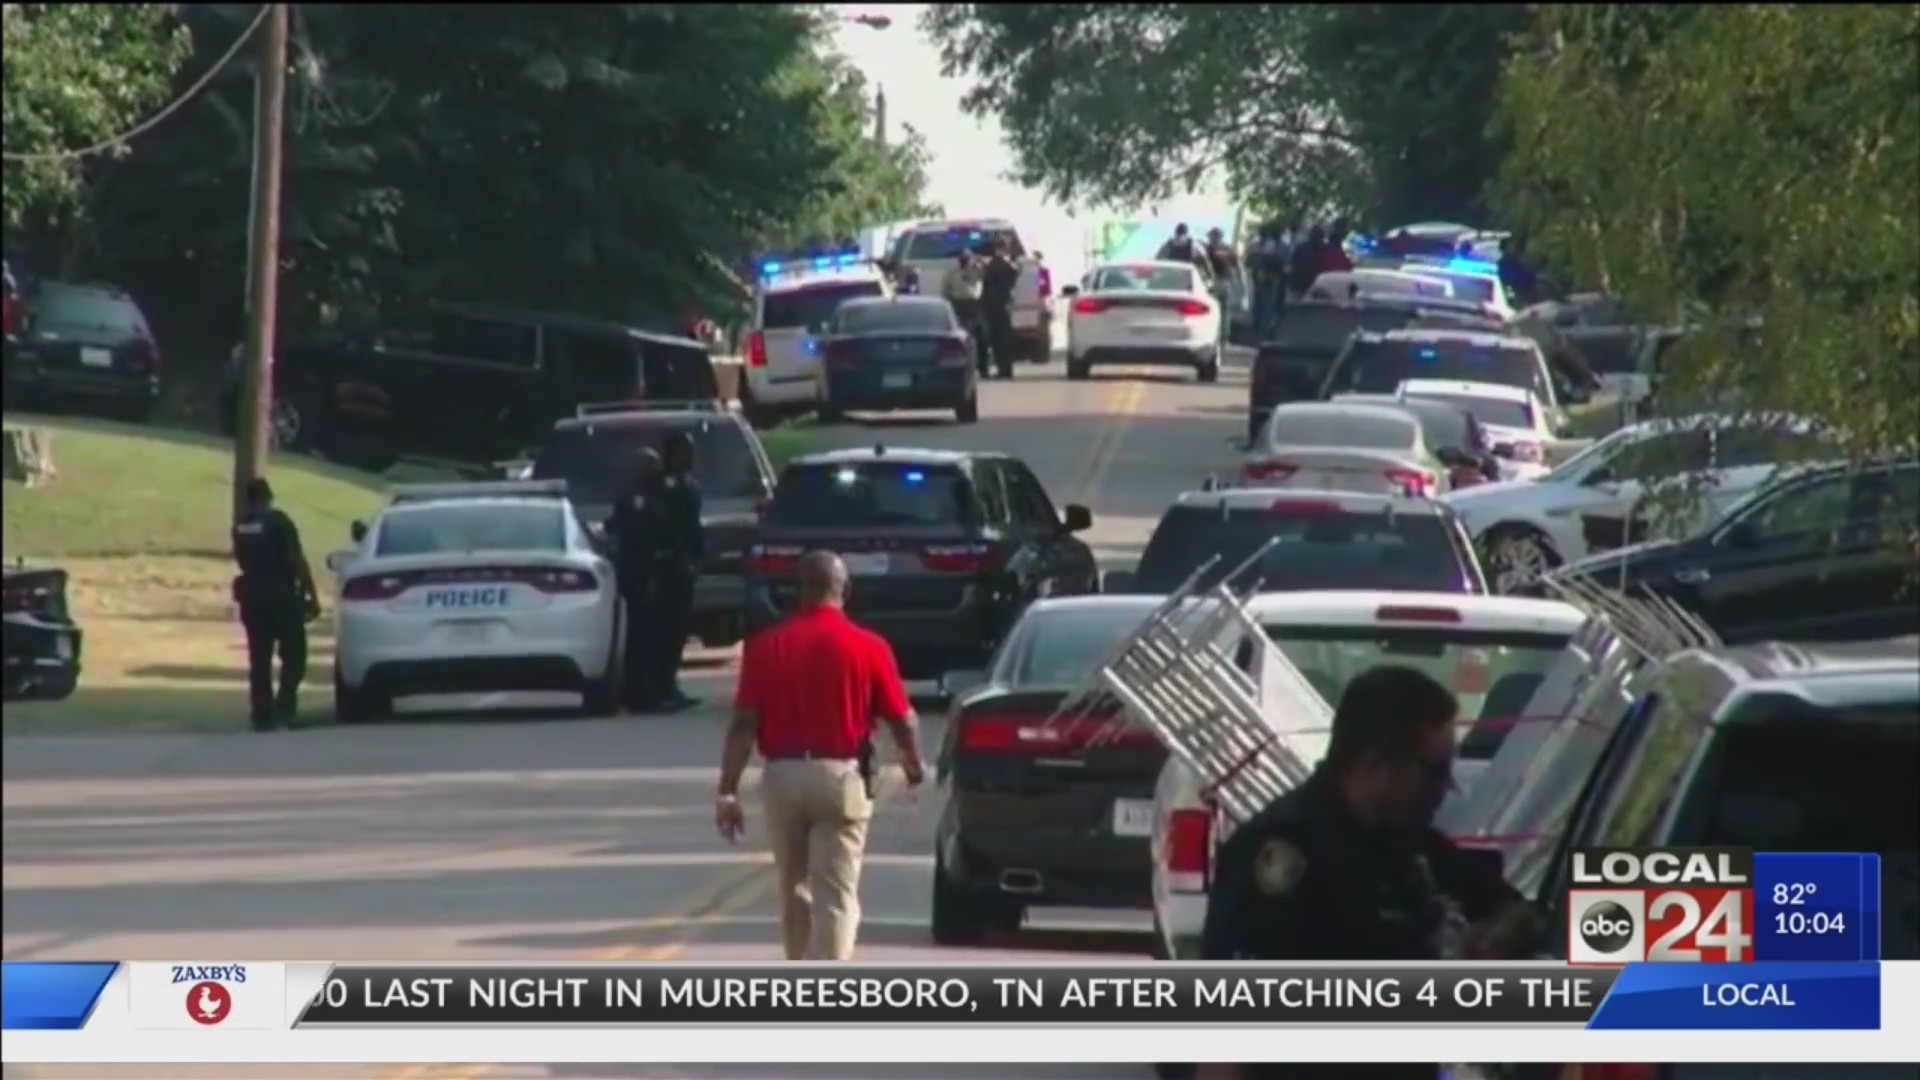 Unanswered questions linger after a man was shot to death by authorities in south Memphis